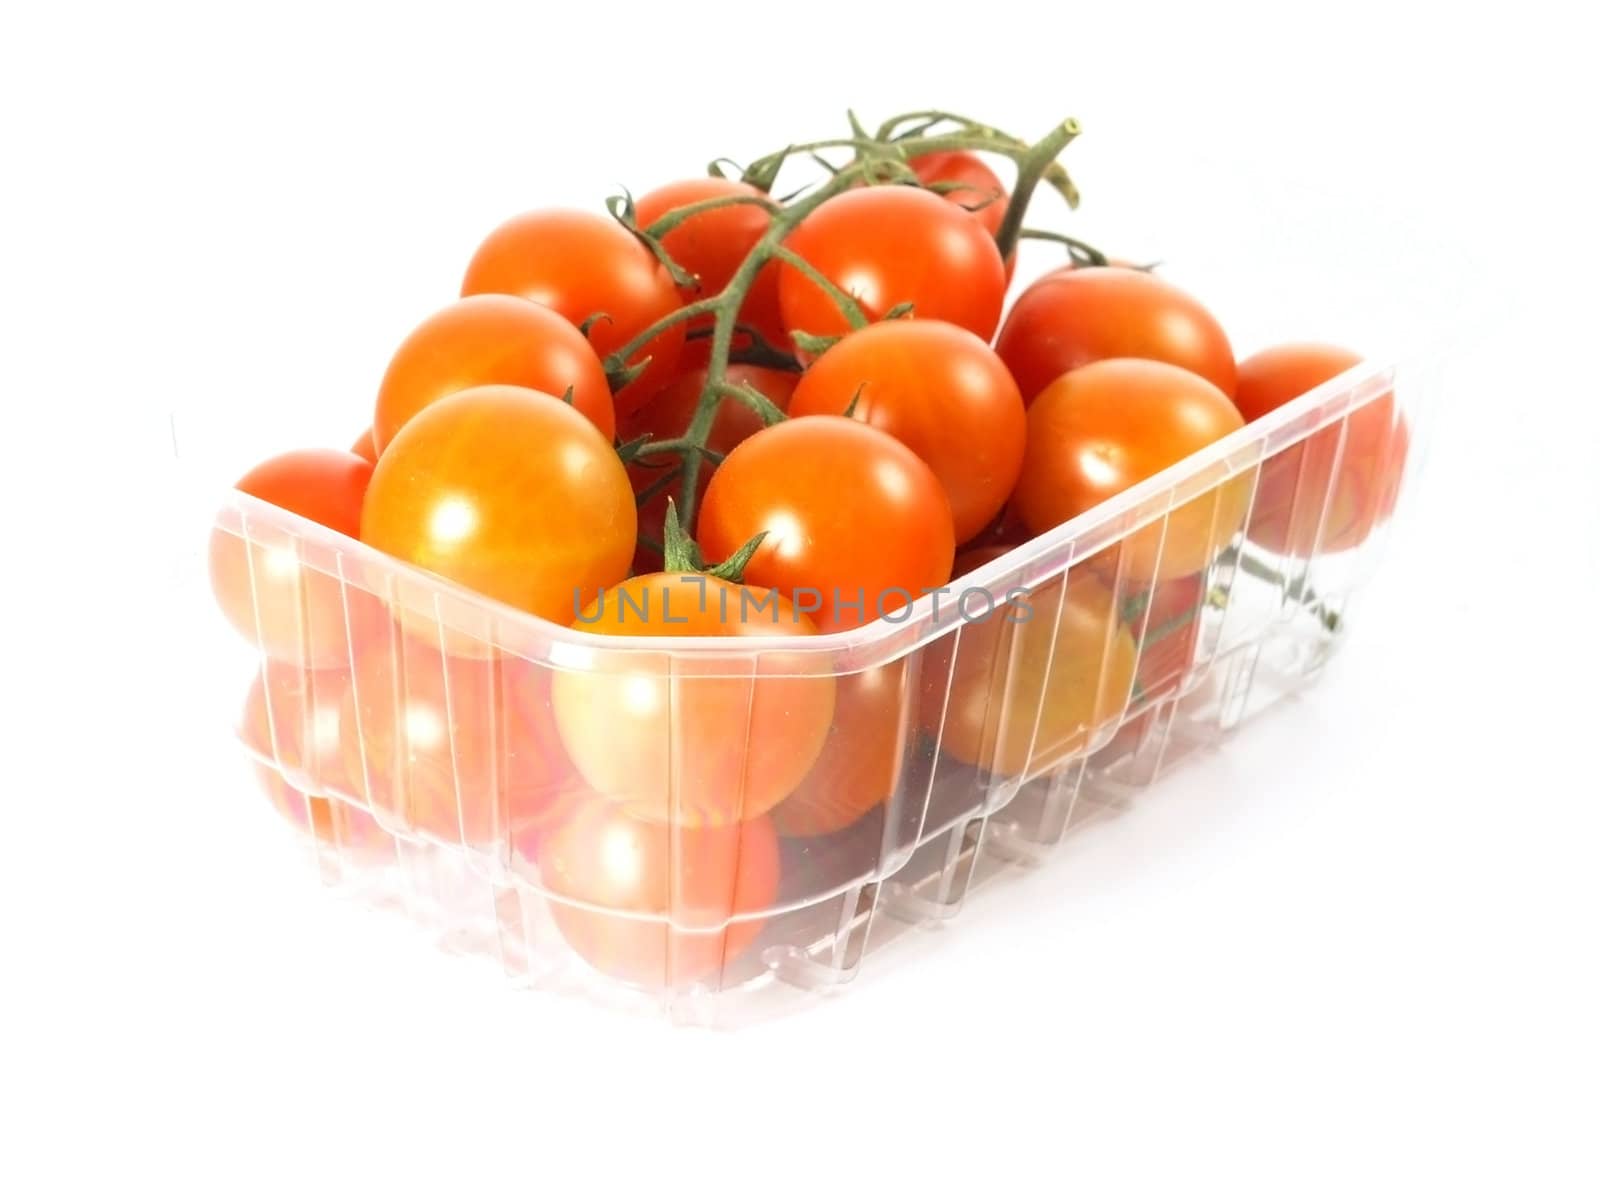 Ripe red tomatoes on  white background (500g)